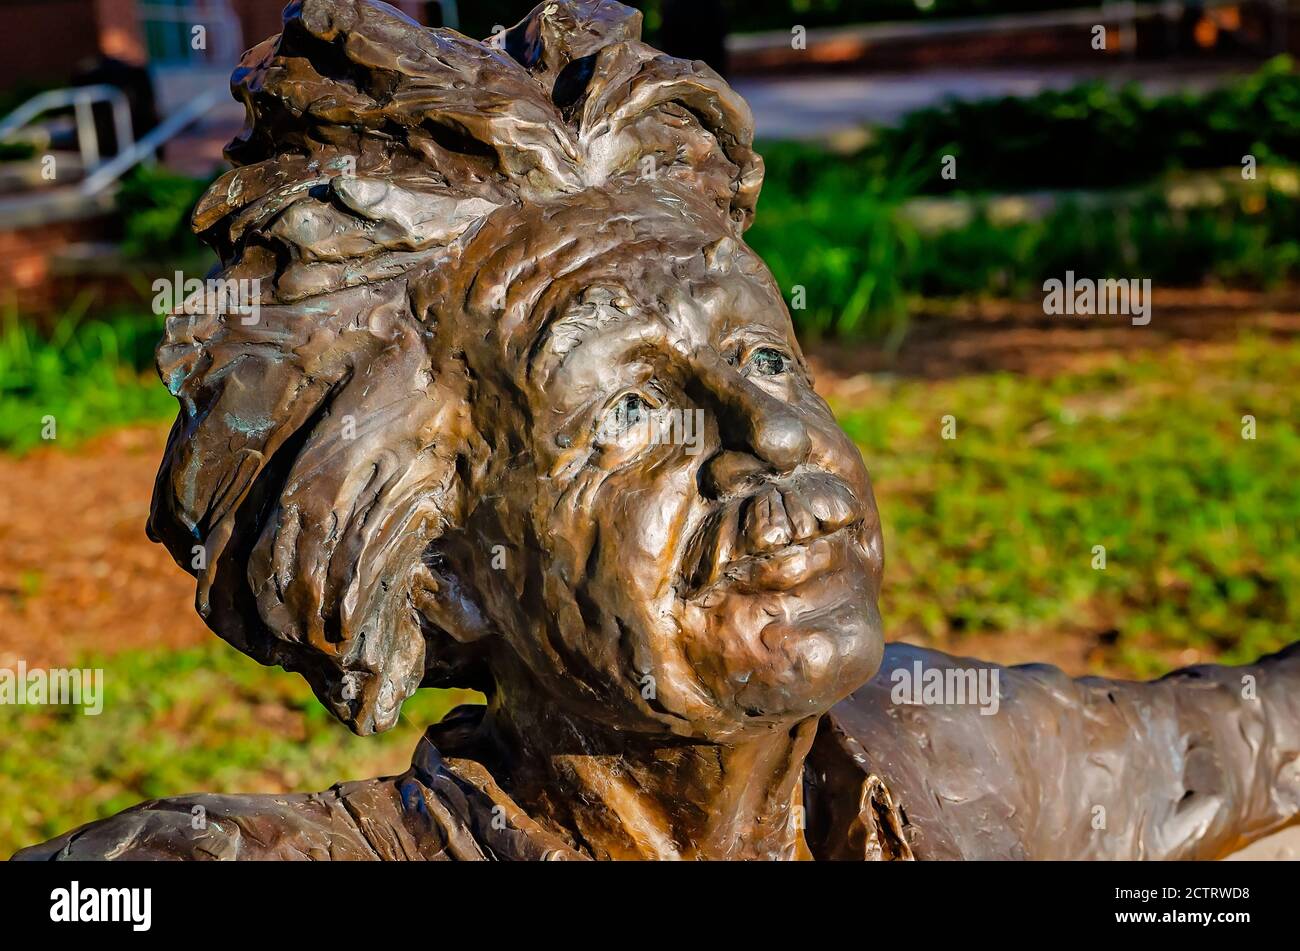 The Einstein bench, a bronze statue of Albert Einstein, is pictured at the University of South Alabama, Aug. 22, 2020, in Mobile, Alabama. Stock Photo